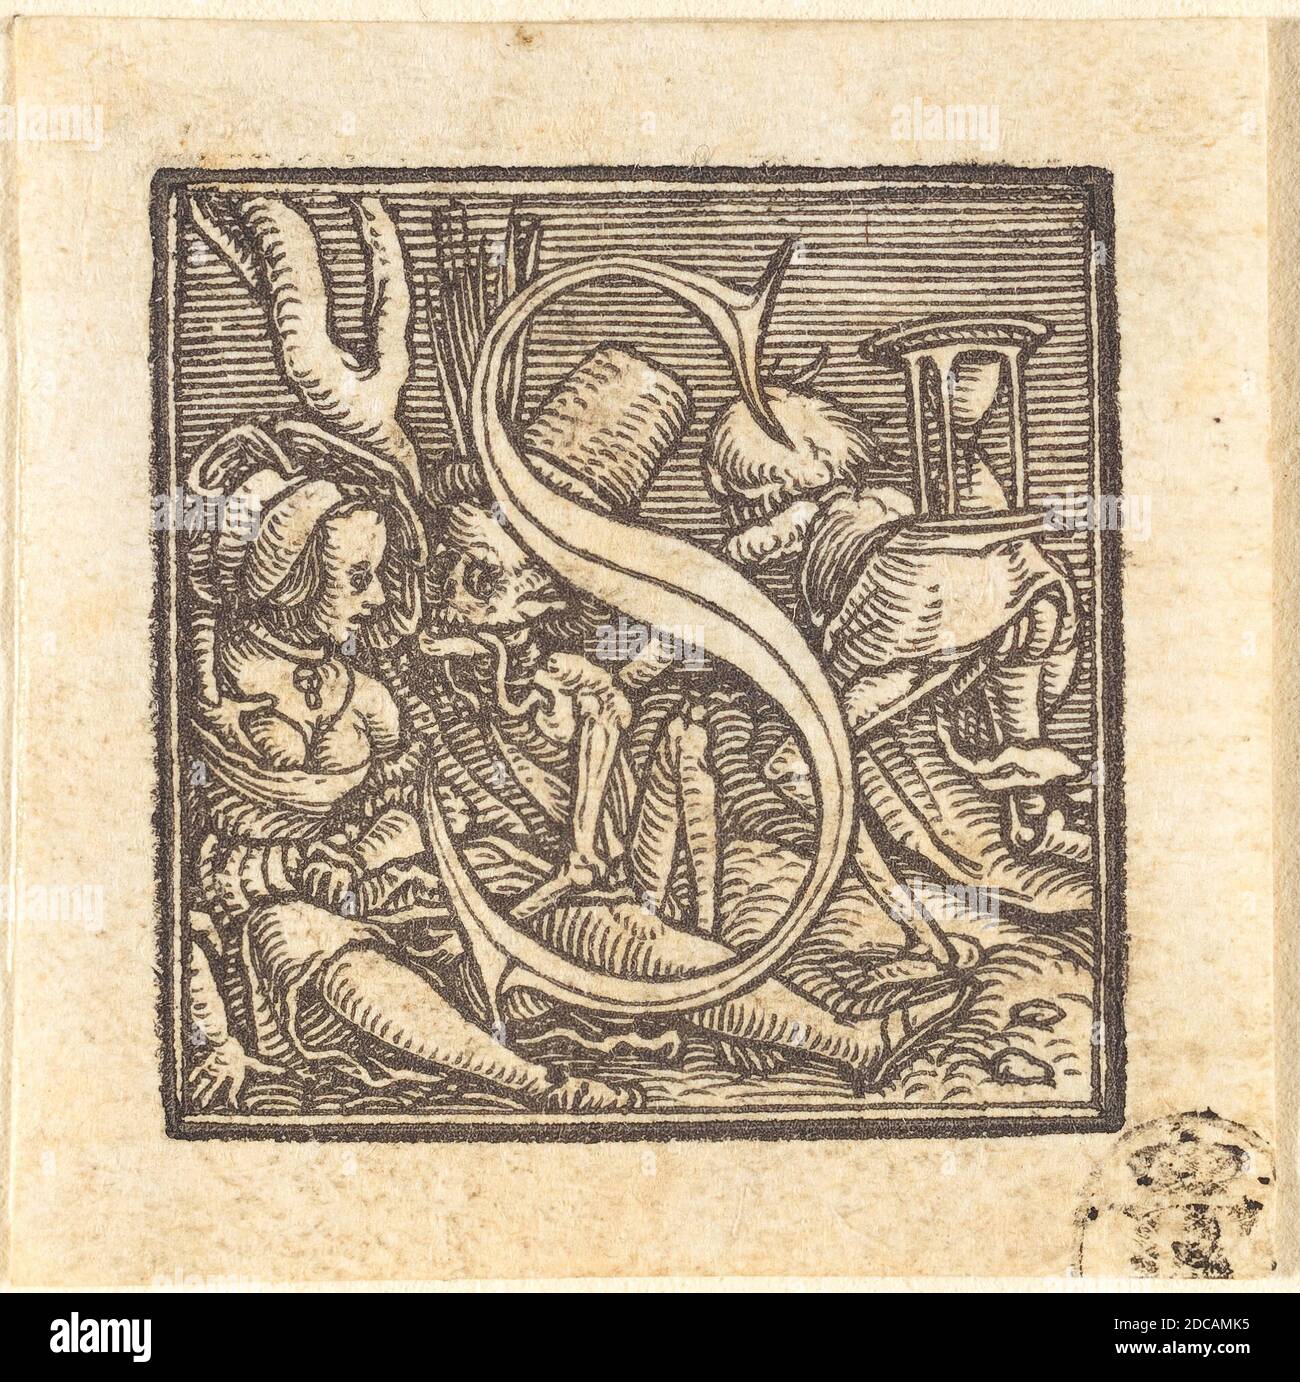 Hans Holbein the Younger, (artist), German, 1497/1498 - 1543, Letter S, Alphabet of Death, (series), woodcut Stock Photo